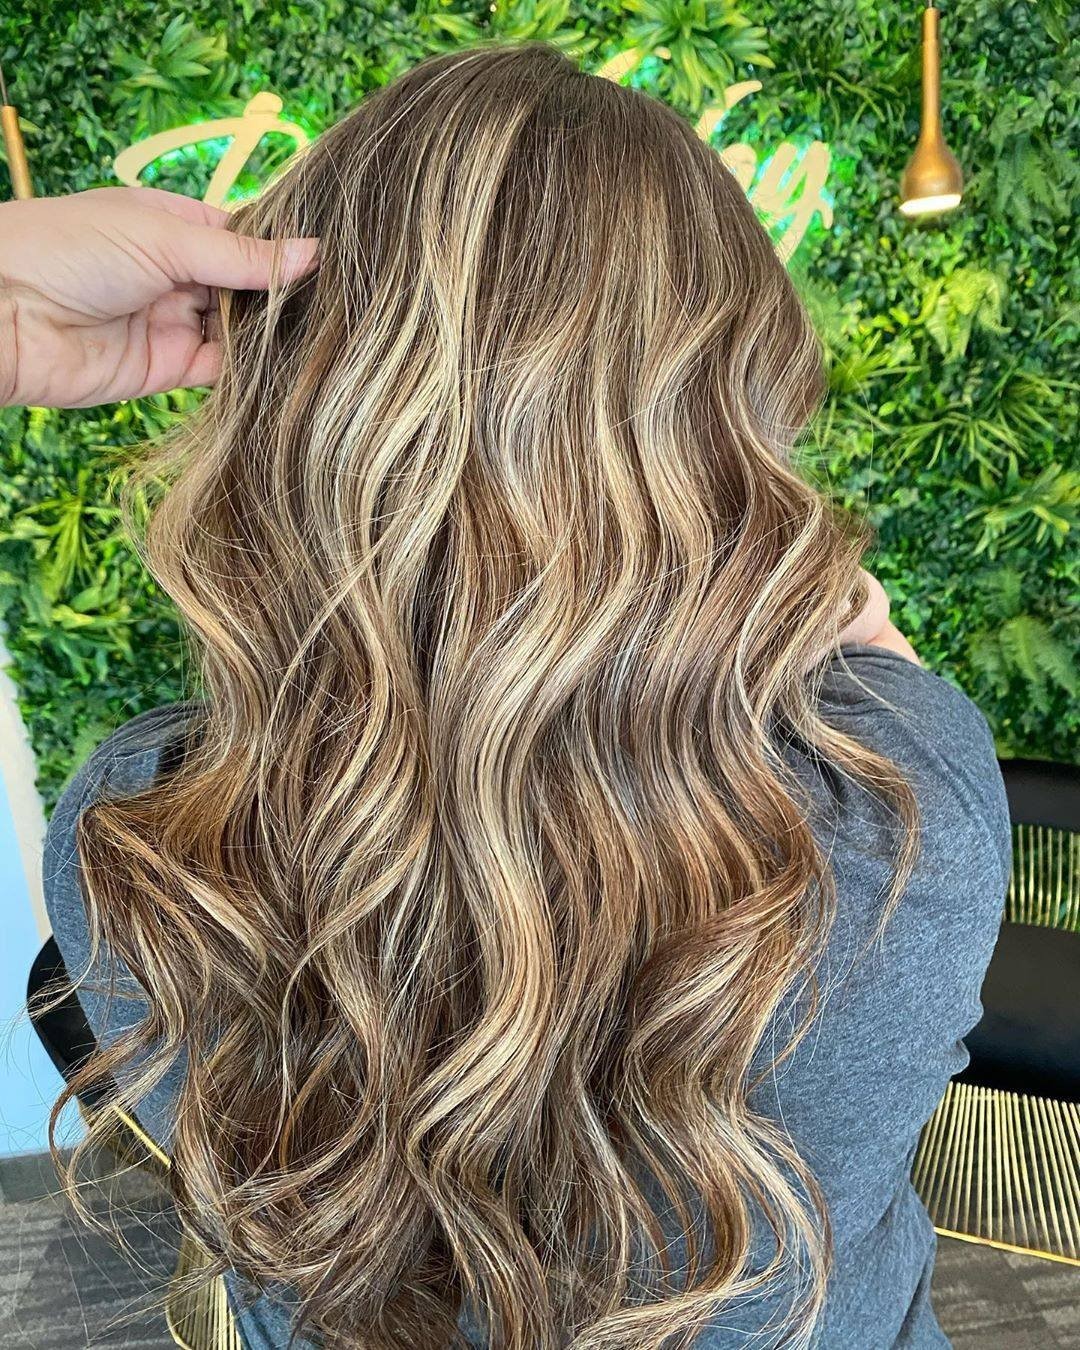 Schwarzkopf Professional - There is nothing like a refreshed balayage! 🖤

*Formula* 👉 @hairbykristinamay�Lift and #balayage with her go-to Lightener ("no matter what" 😍), #BLONDME + 20 Vol. Lowlight +...